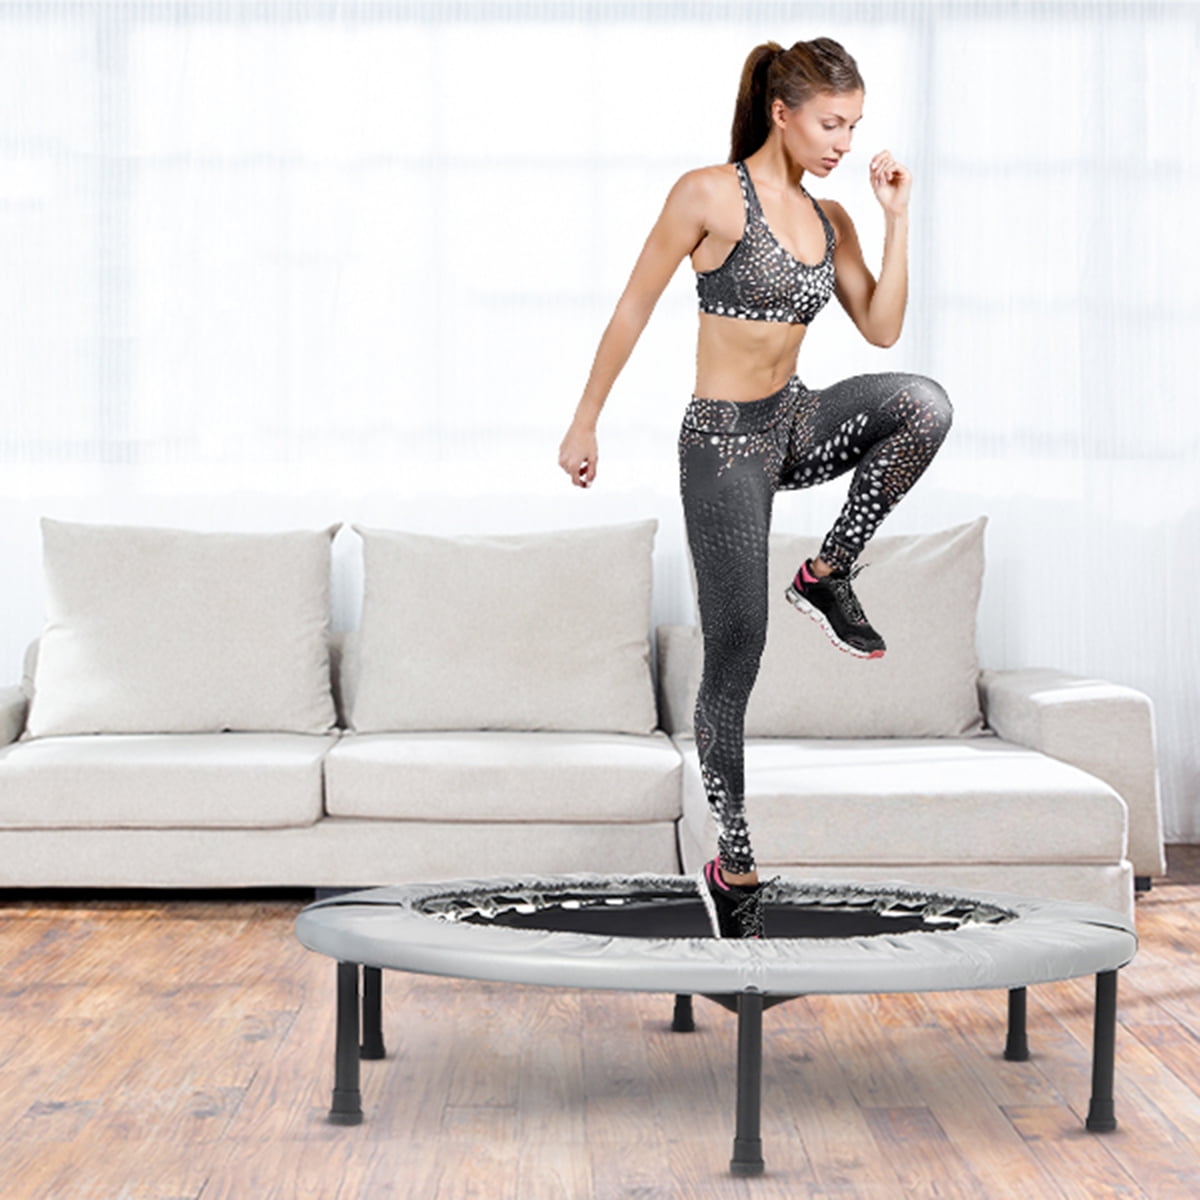 Mini Trampoline for Kids Adults, 40" Foldable Fitness Rebounder Small Trampoline Indoor Exercise Trampoline Workout Max Load 220lbs